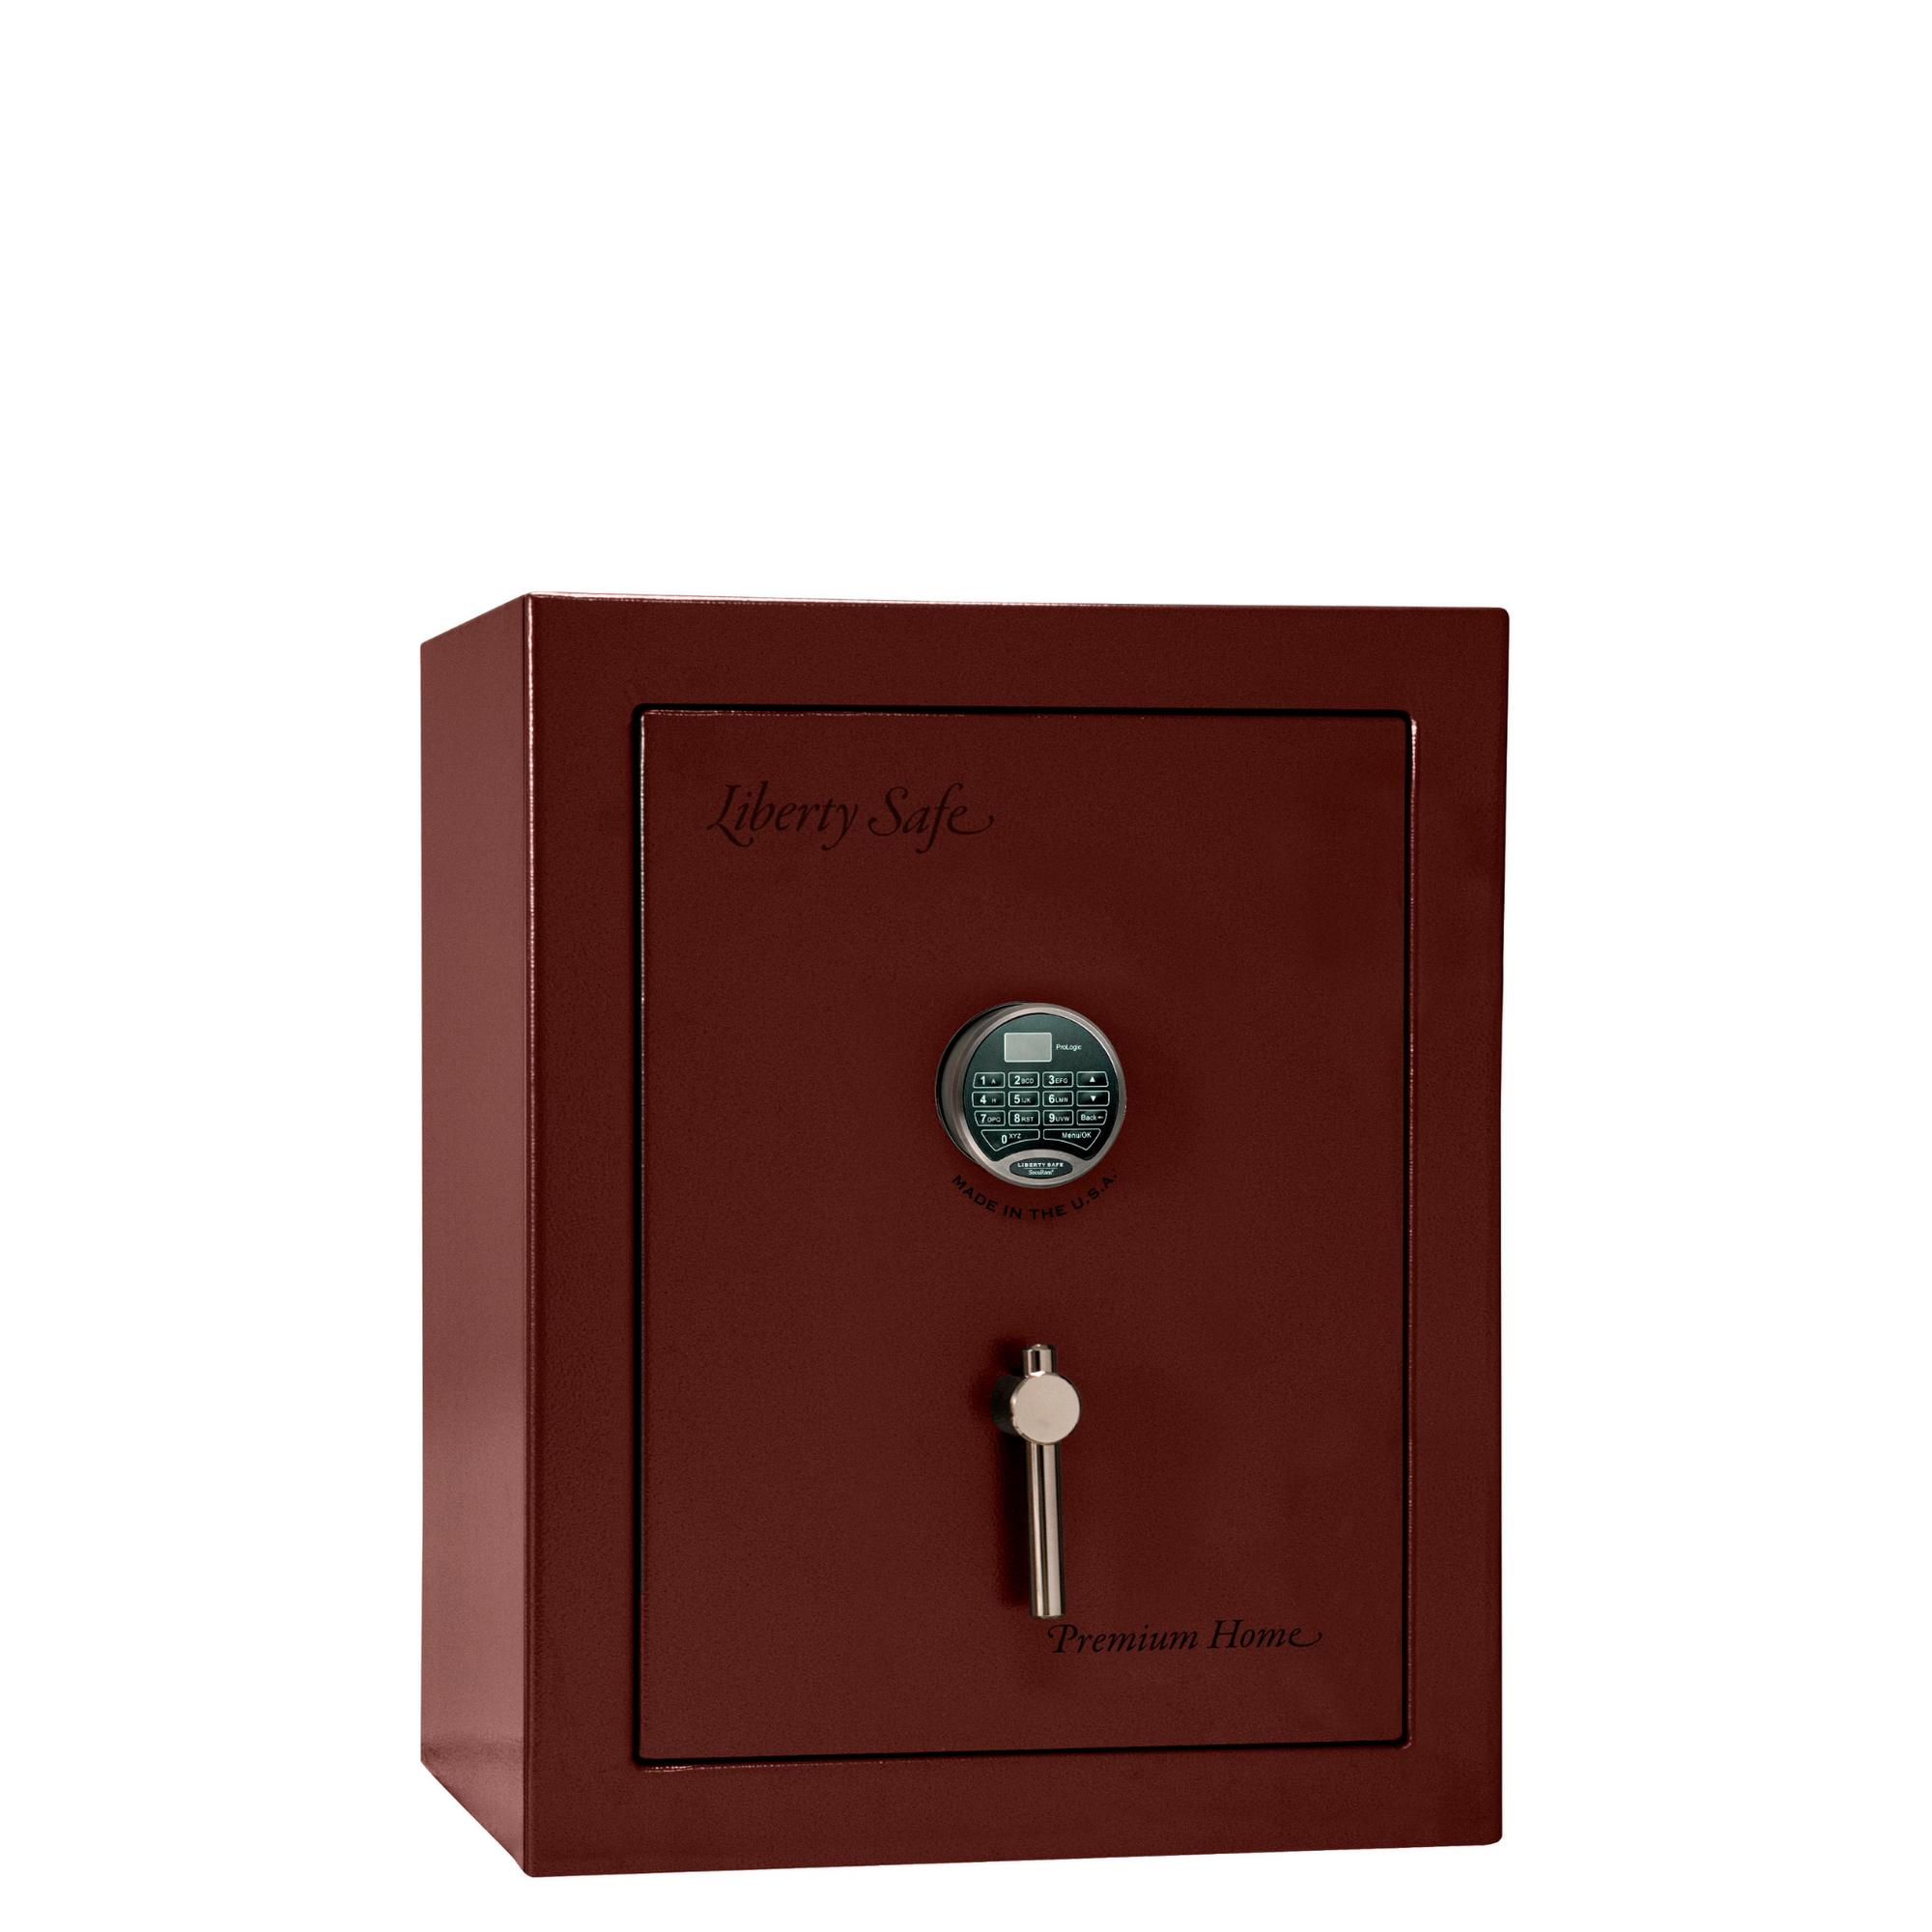 Premium Home Series | Level 7 Security | 2 Hour Fire Protection | 08 | Dimensions: 29.75"(H) x 24.5"(W) x 19"(D) | Burgundy Marble - Closed Door